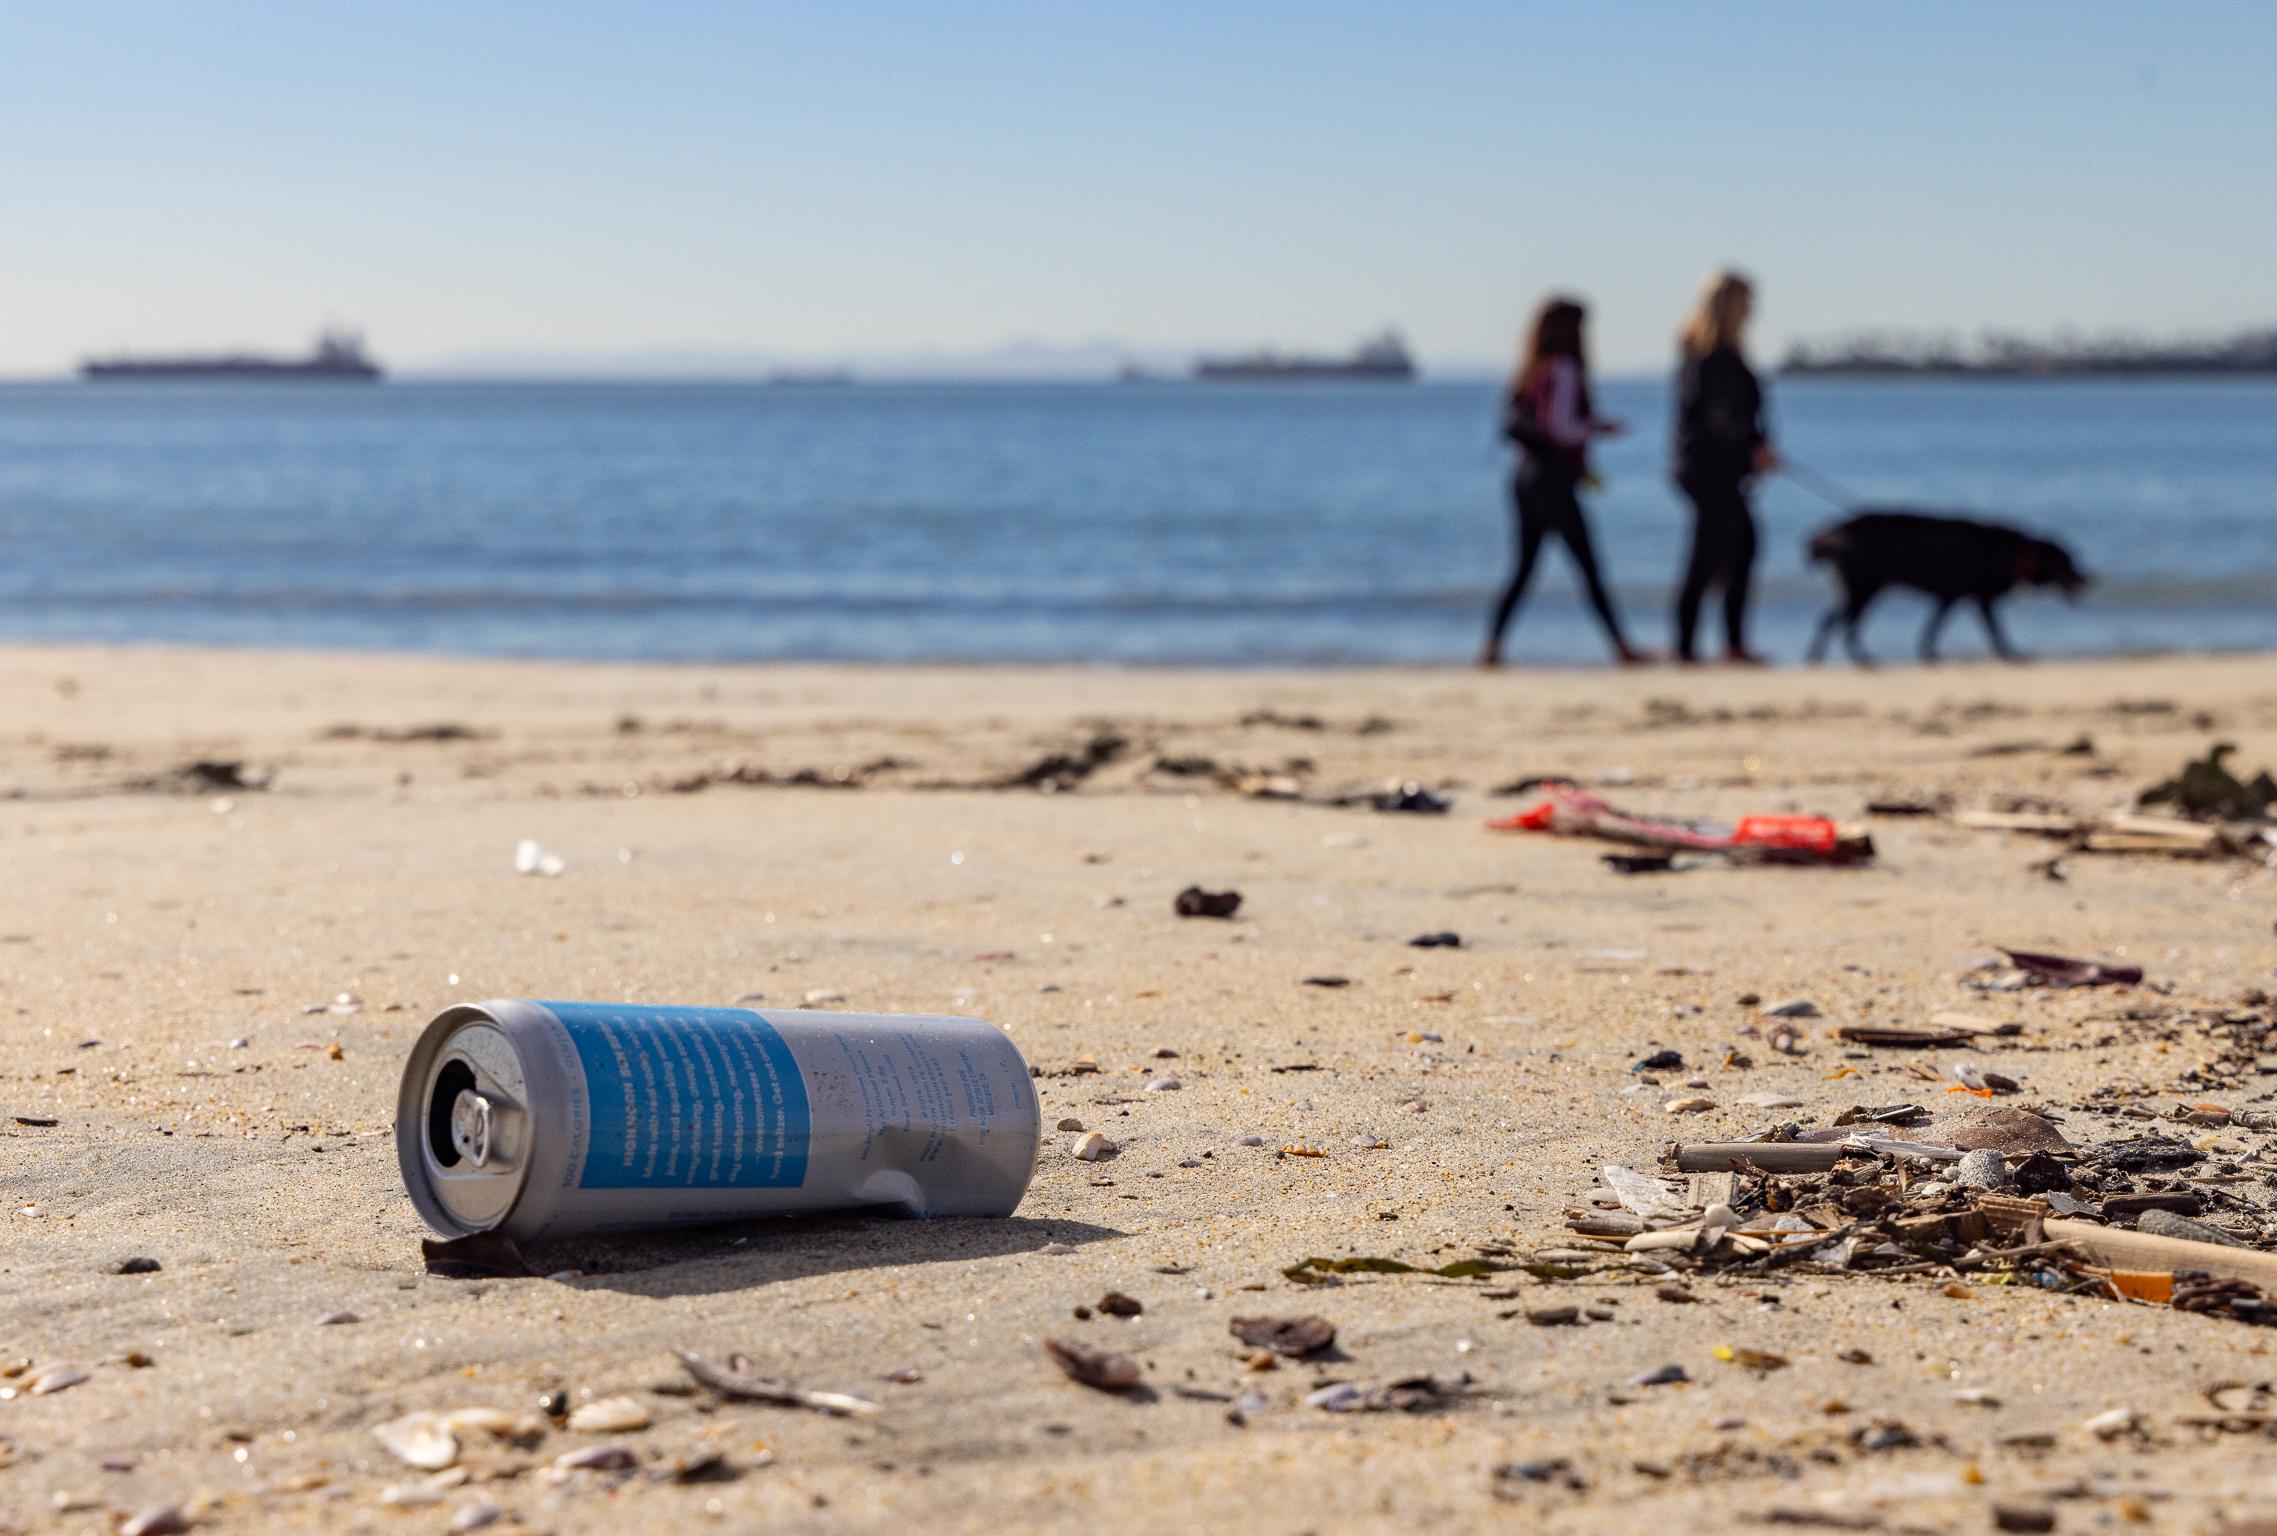 Camping to Be Banned at Popular California Beach After Human Waste, Trash Threaten Wildlife